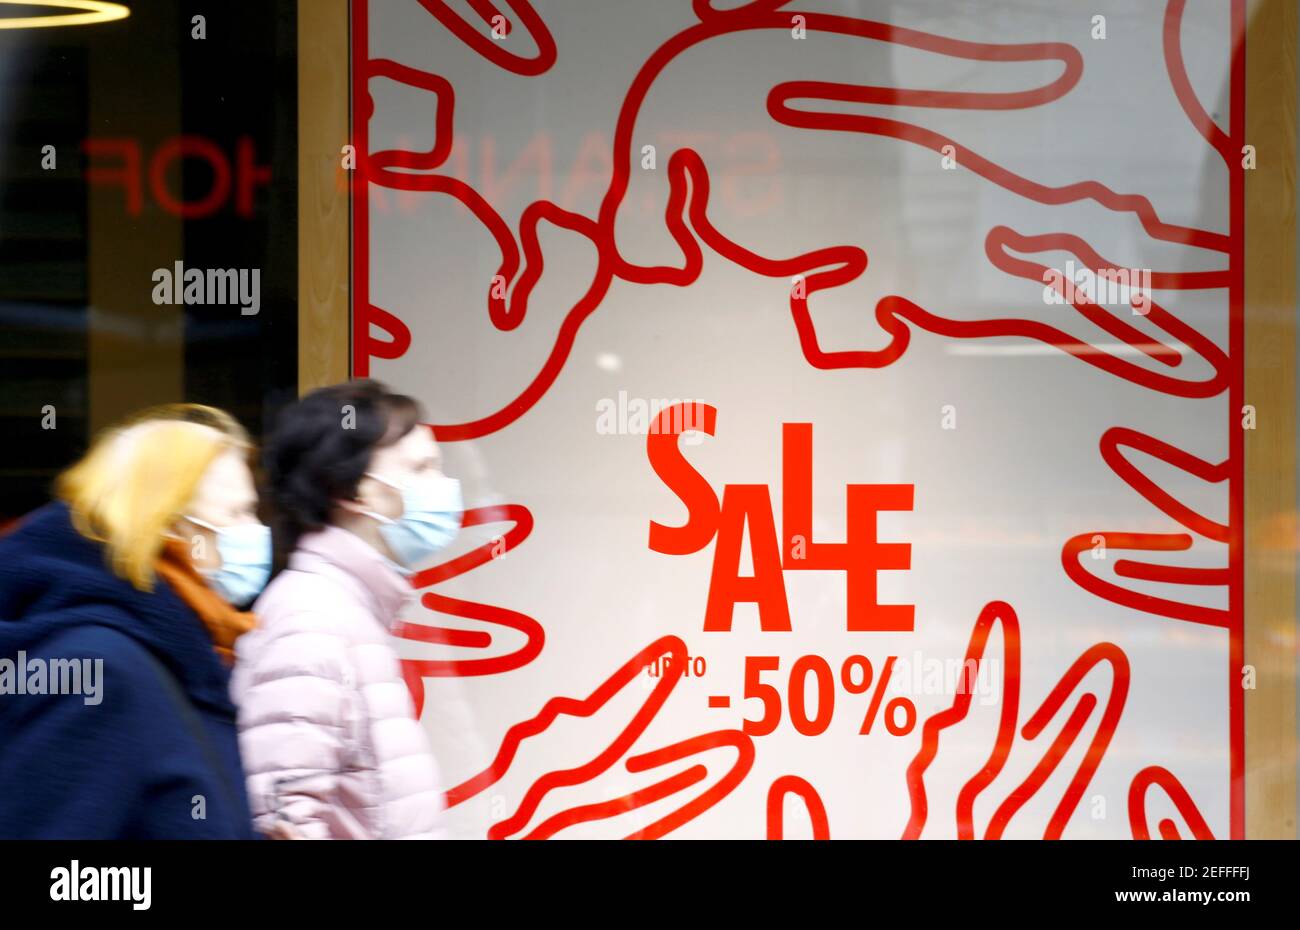 Posters offering special discount on sales are seen at a Lacoste store, as  the spread of the coronavirus disease (COVID-19) continues, at the  Bahnhofstrasse shopping street in Zurich, Switzerland February 17, 2021.